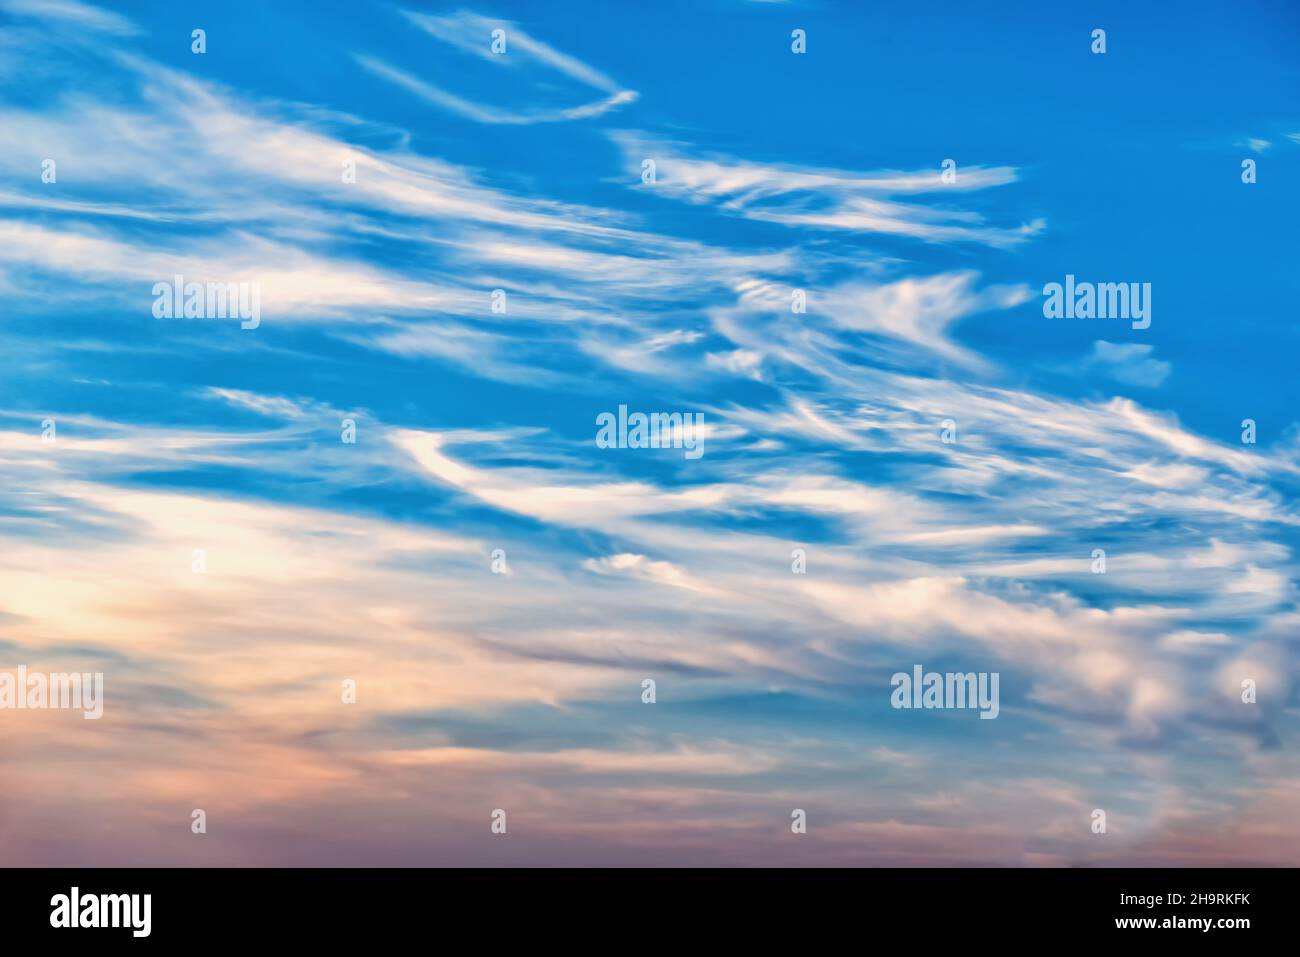 Celestial landscape of cirrus and cumulus clouds at dawn Stock Photo